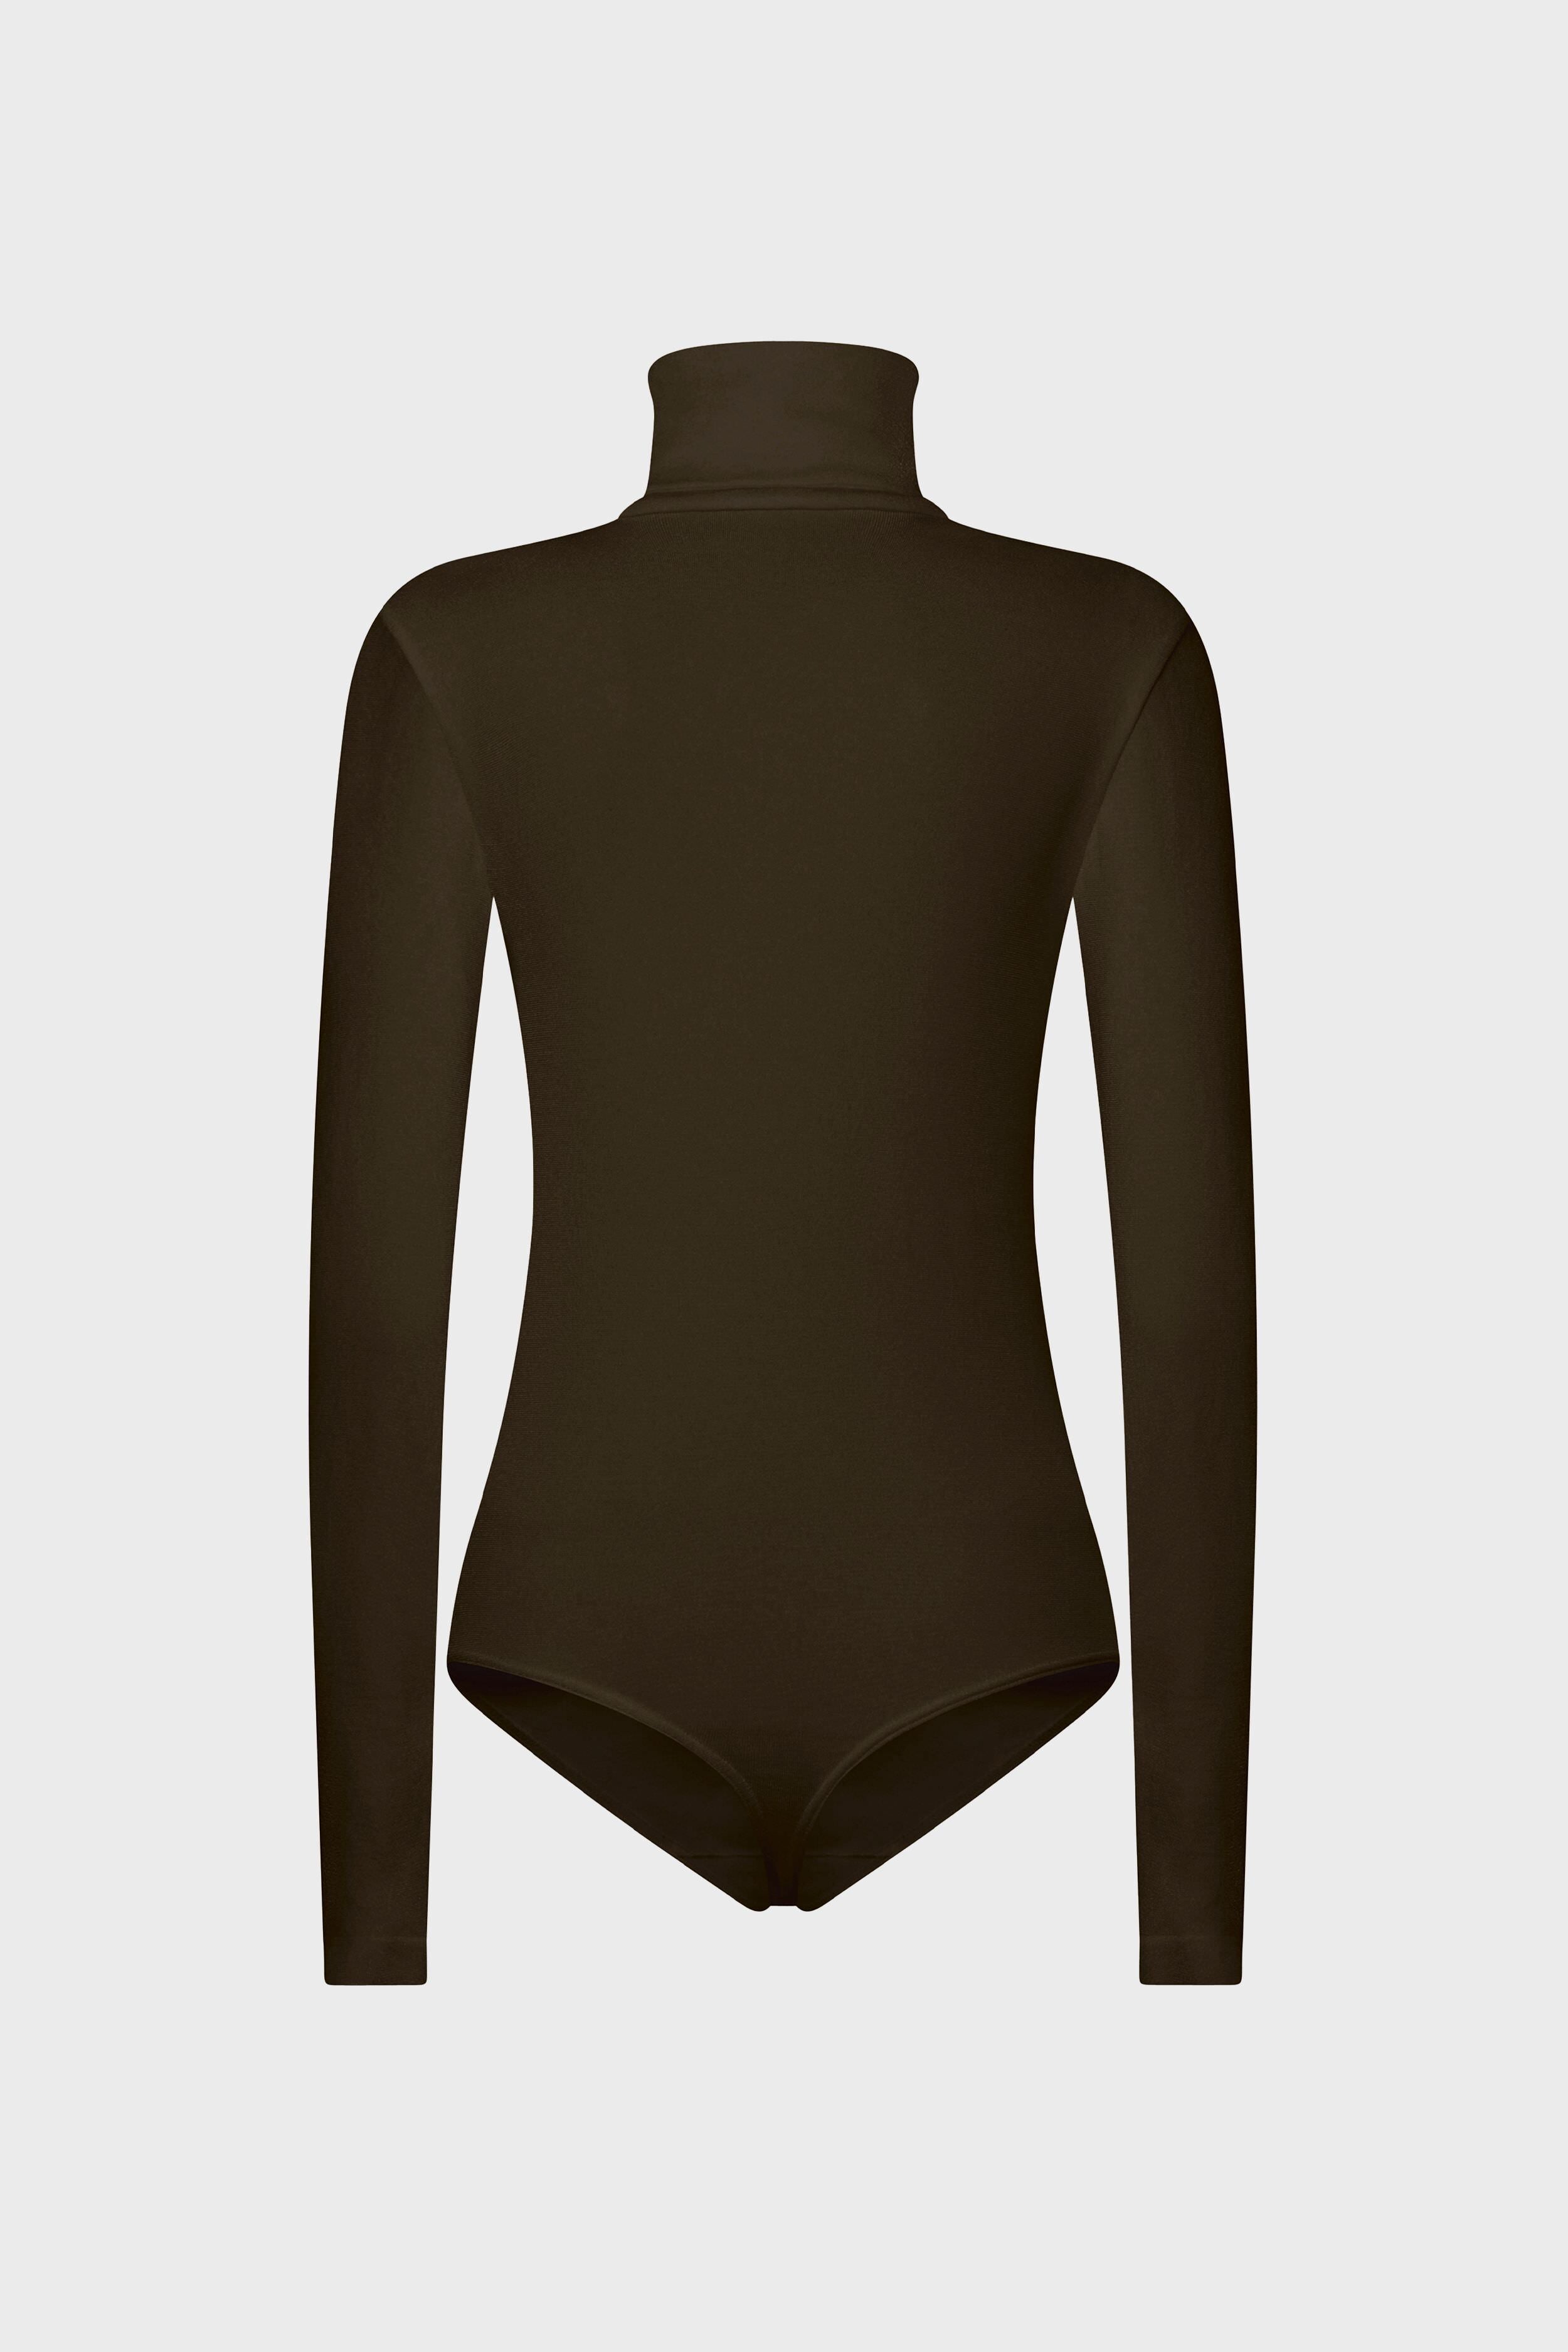 Wolford Colorado String Body - M - Chateau Cuddly Roll Neck for